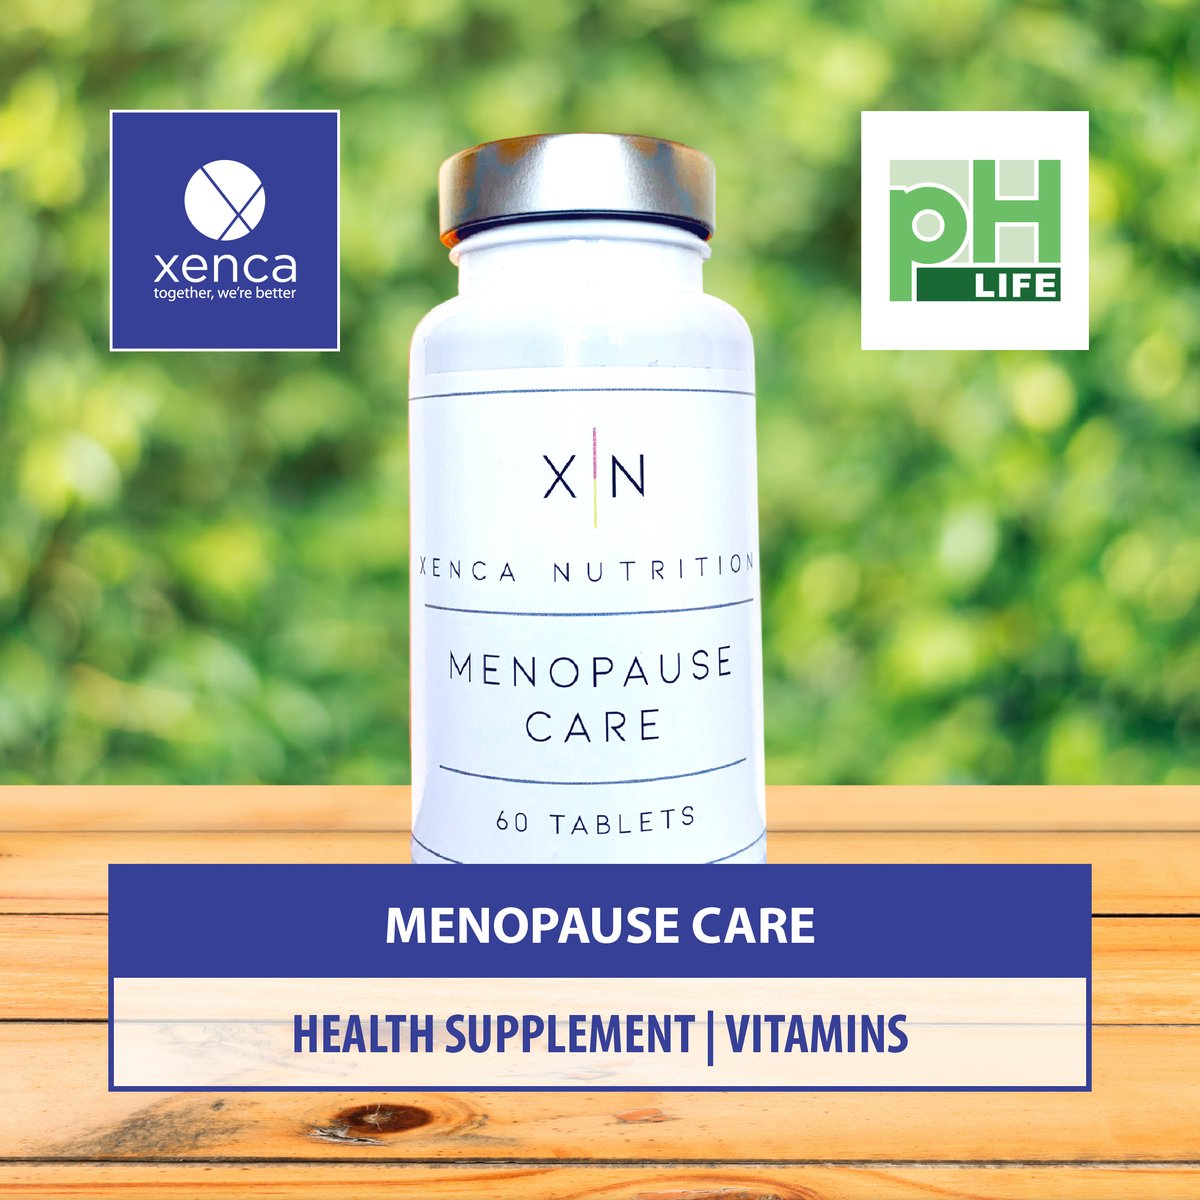 Whilst some women experience the menopause with only minimal symptoms, others may experience more severe symptoms.  Specific vitamins and nutraceuticals have been shown to alleviate some of the symptoms ph-life.co.uk/products/xenca…